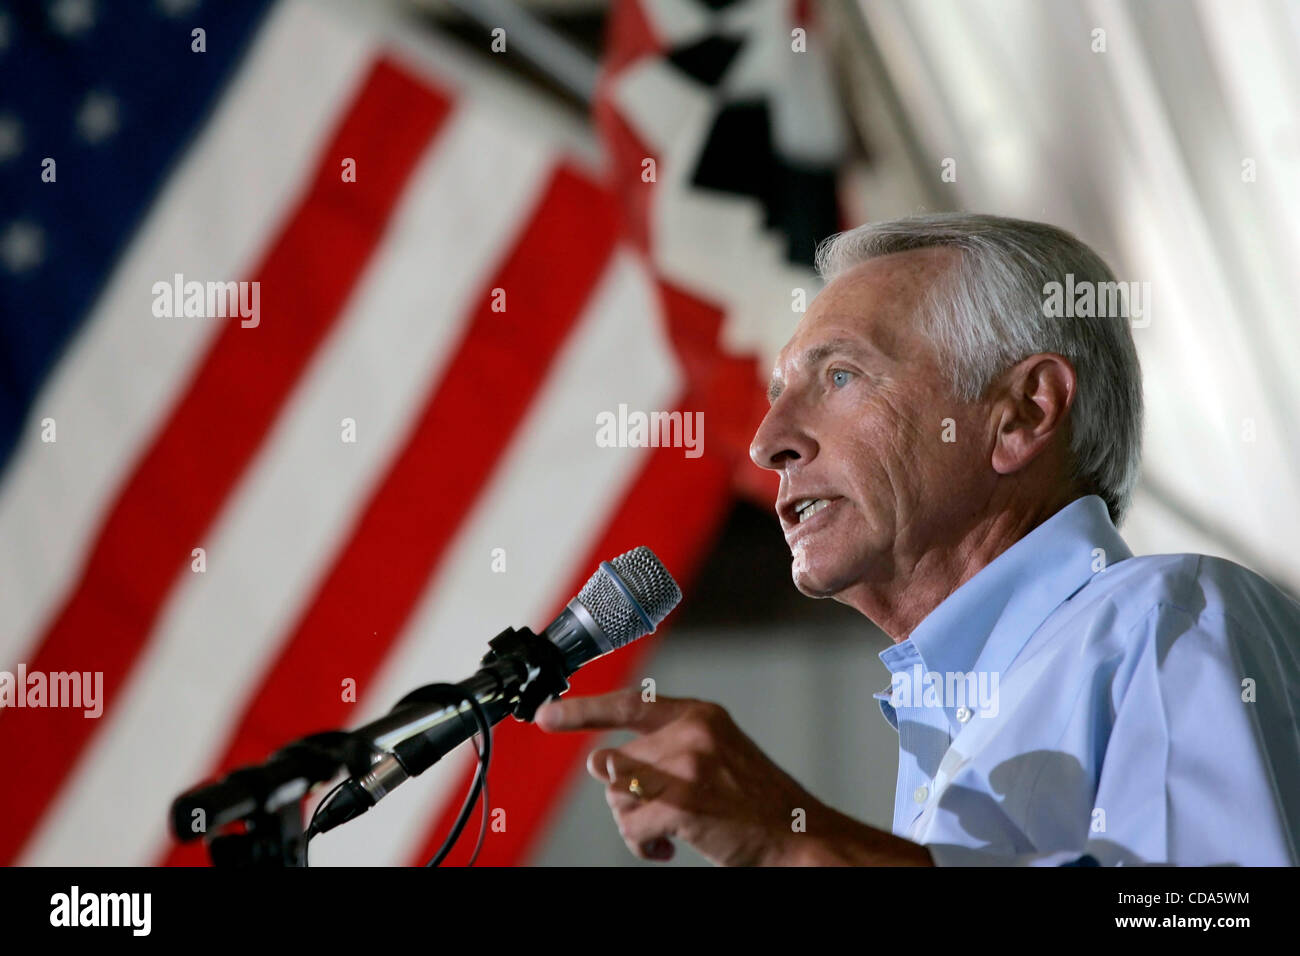 Aug 07, 2010 - Fancy Farm, Kentucky, U.S. - Governor STEVE BESHEAR speaks during the 130th annual Fancy Farm Picnic. The Democrat, who will seek reelection in 2011, delivered a fiery speech boasting about his gubernatorial record and blasting the Republican nominee for Senate. (Credit Image: © Billy Stock Photo